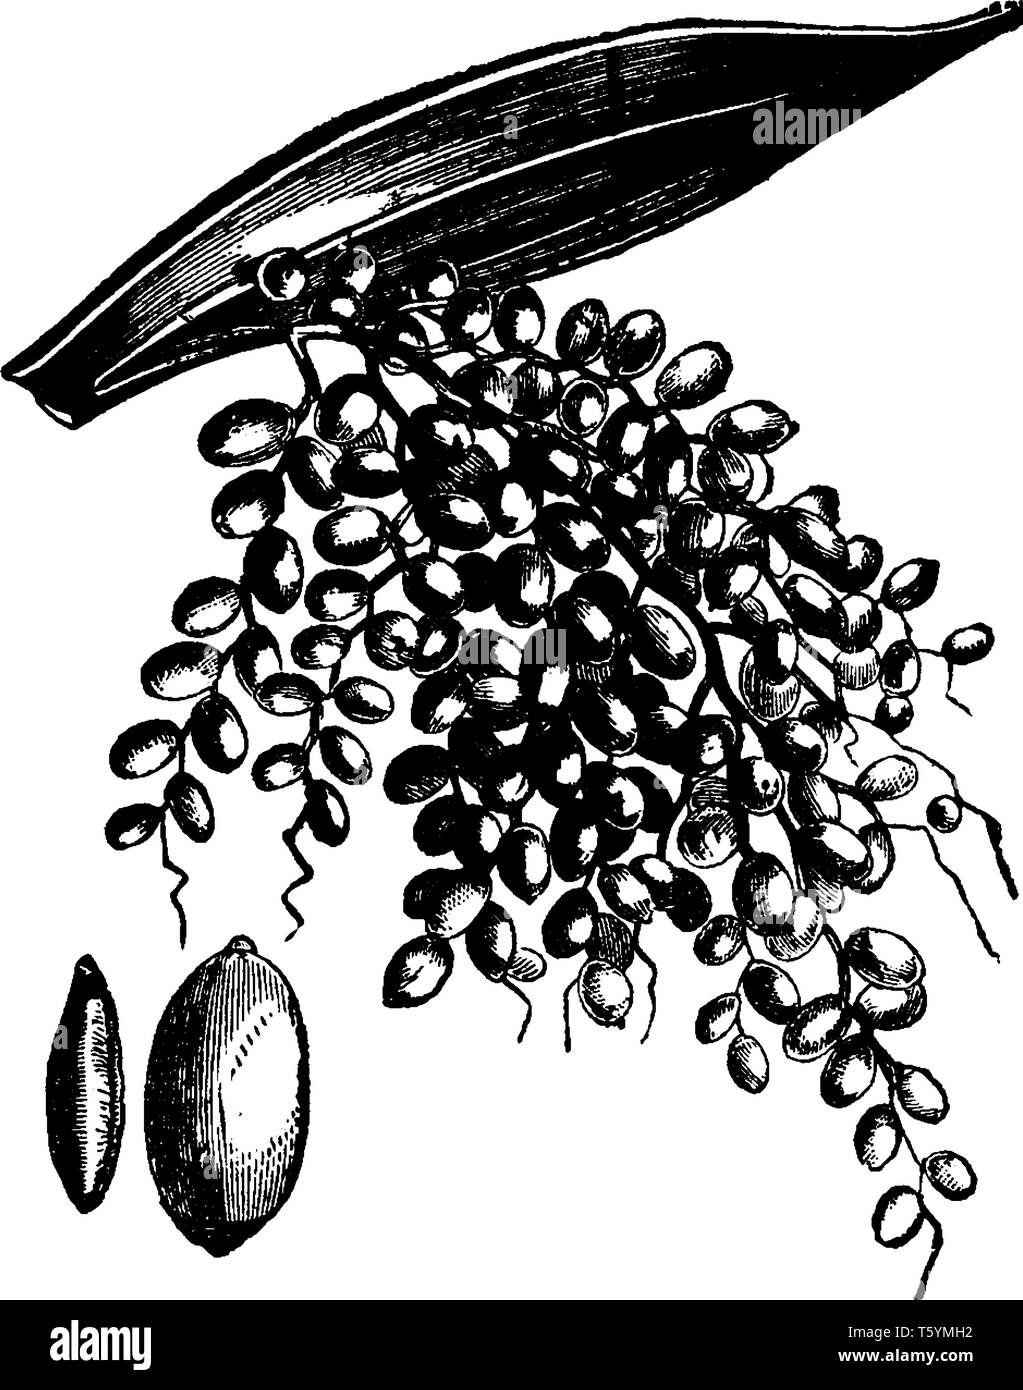 This is image of the date tree. This image showing a date fruit, it has small. It is bunch of data fruit; they grow up on a single branch. This fruit  Stock Vector